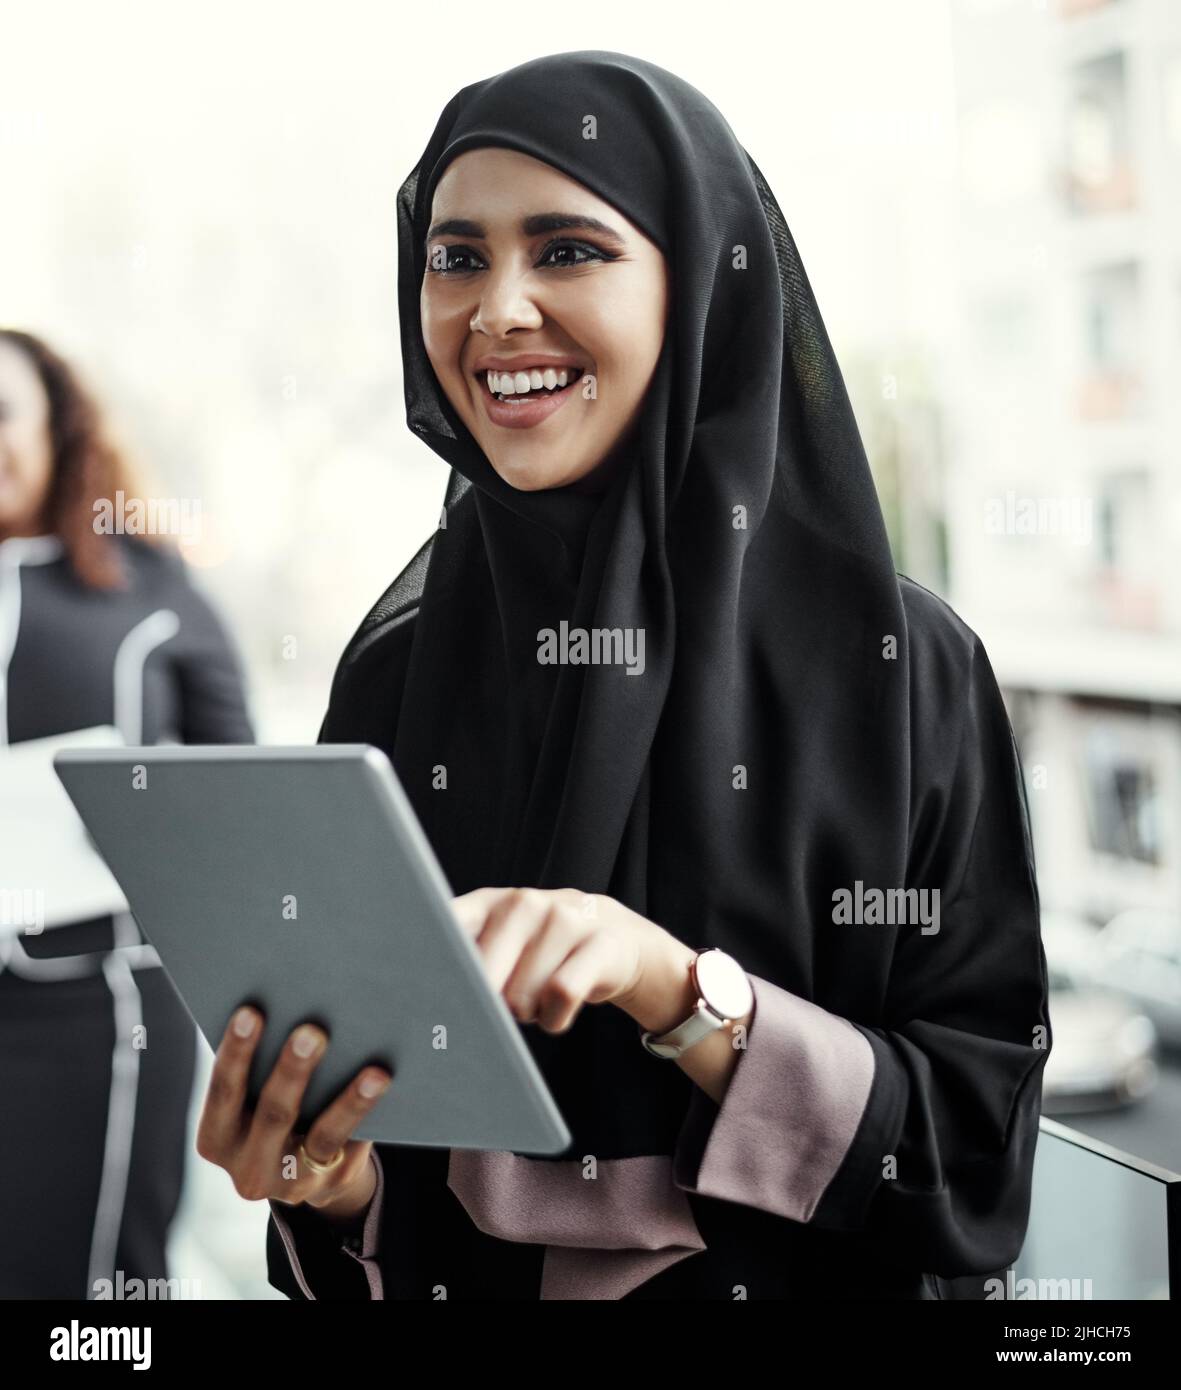 She enjoys working wirelessly. an attractive young businesswoman dressed in Islamic traditional clothing using a tablet on her office balcony. Stock Photo